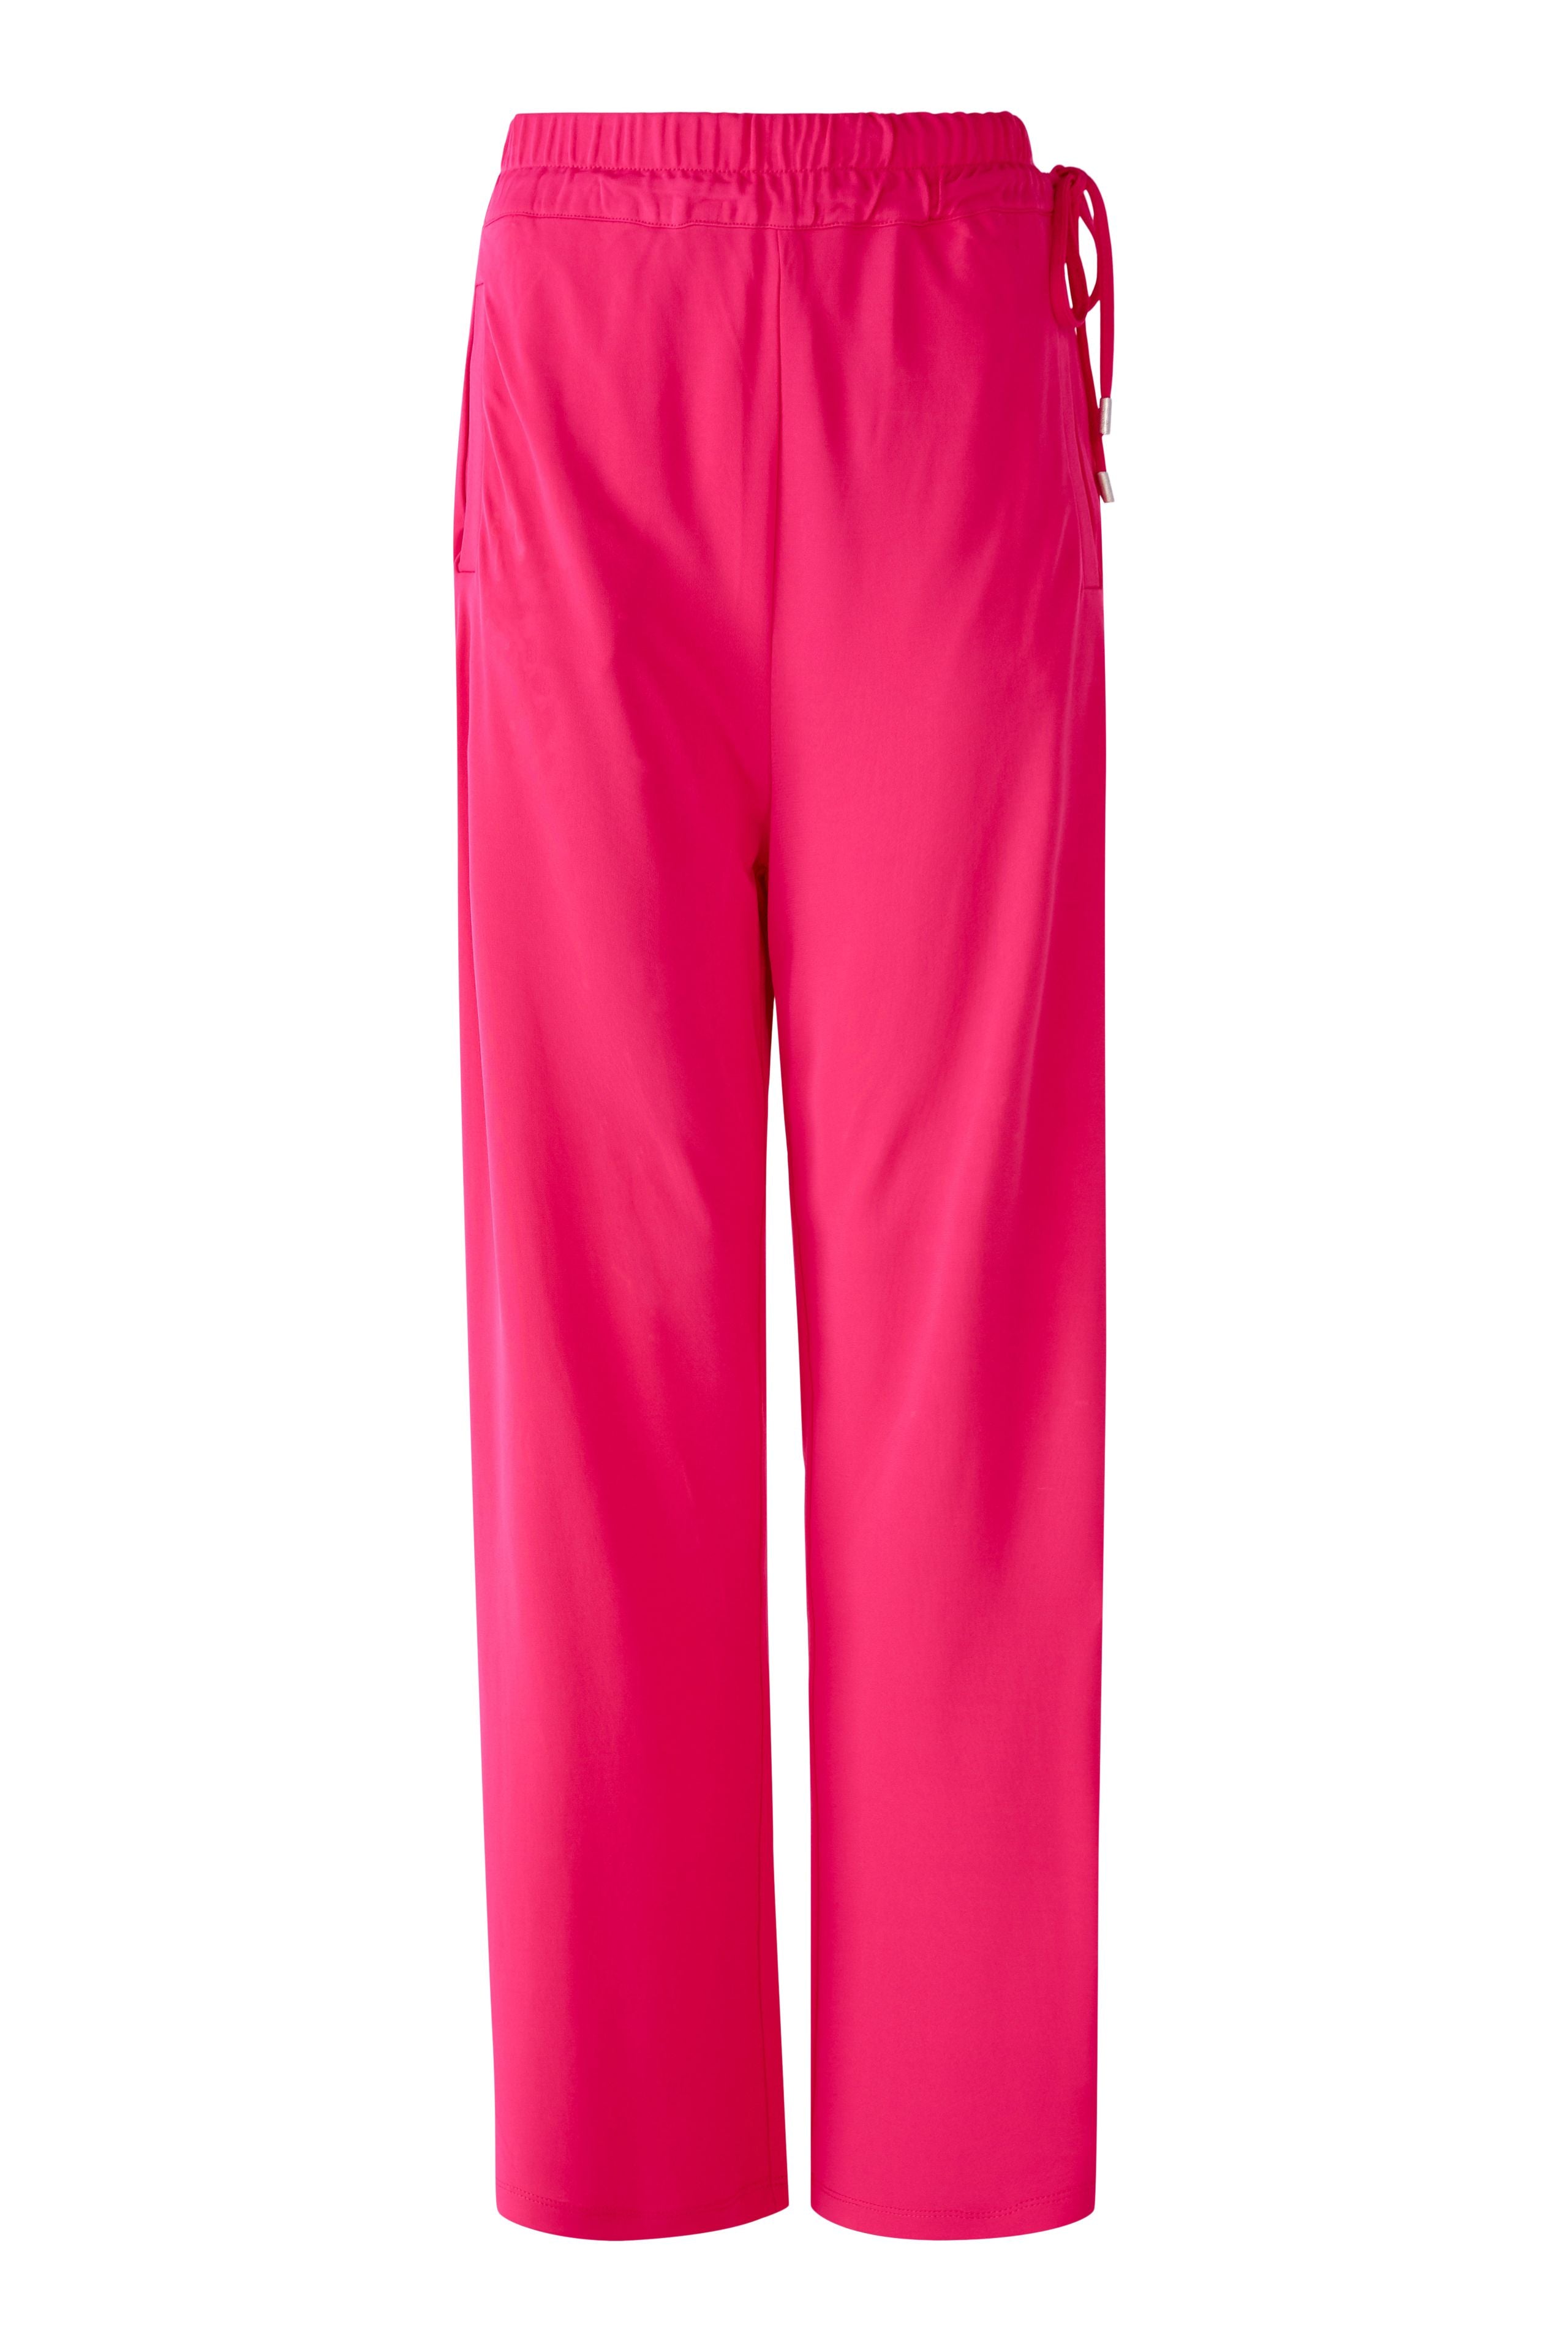 MACBEES OUI PINK STRAIGHT LEG TROUSERS 78340 123